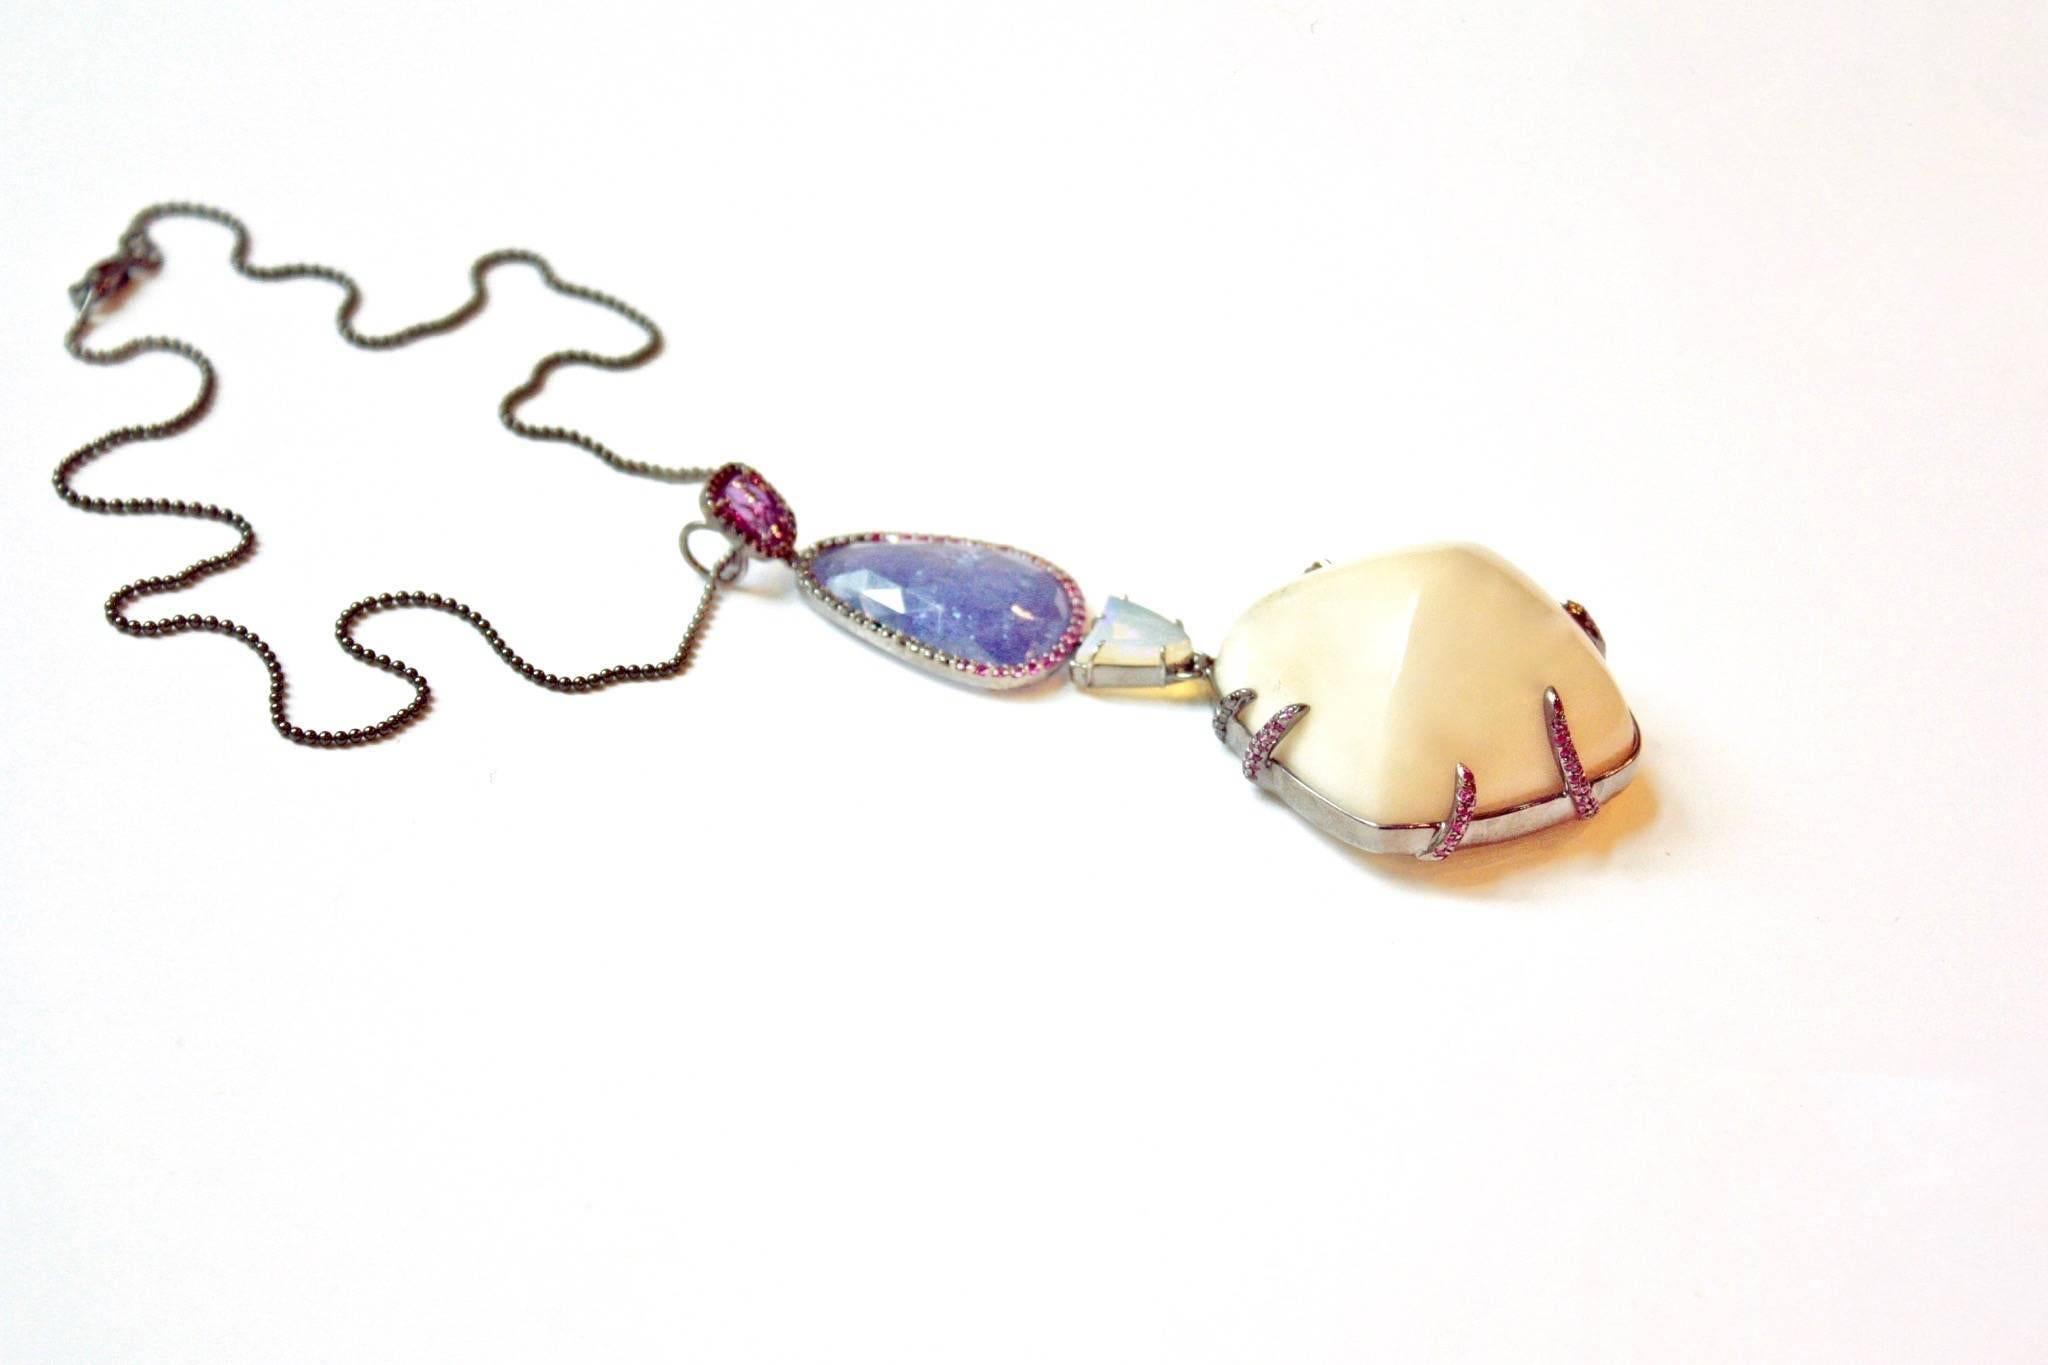 Ellie Necklace
A lavaliere necklace, created to celebrate a large sugar-loaf tagua nut.  The four organically shaped motifs begin with a pink sapphire in a black diamond surround, followed by a rose-cut tanzanite framed in pink sapphires and black